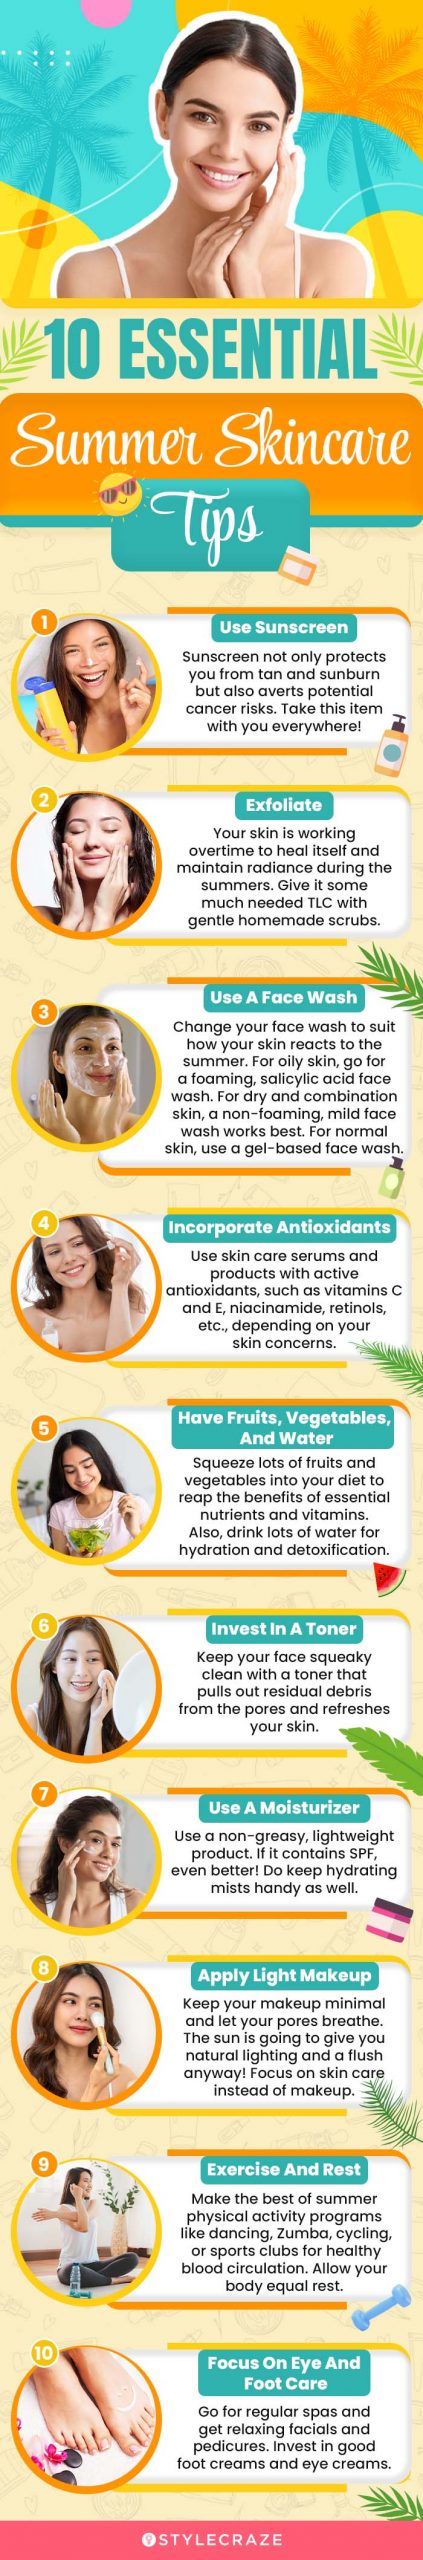 10 essential summer skincare tips(infographic)